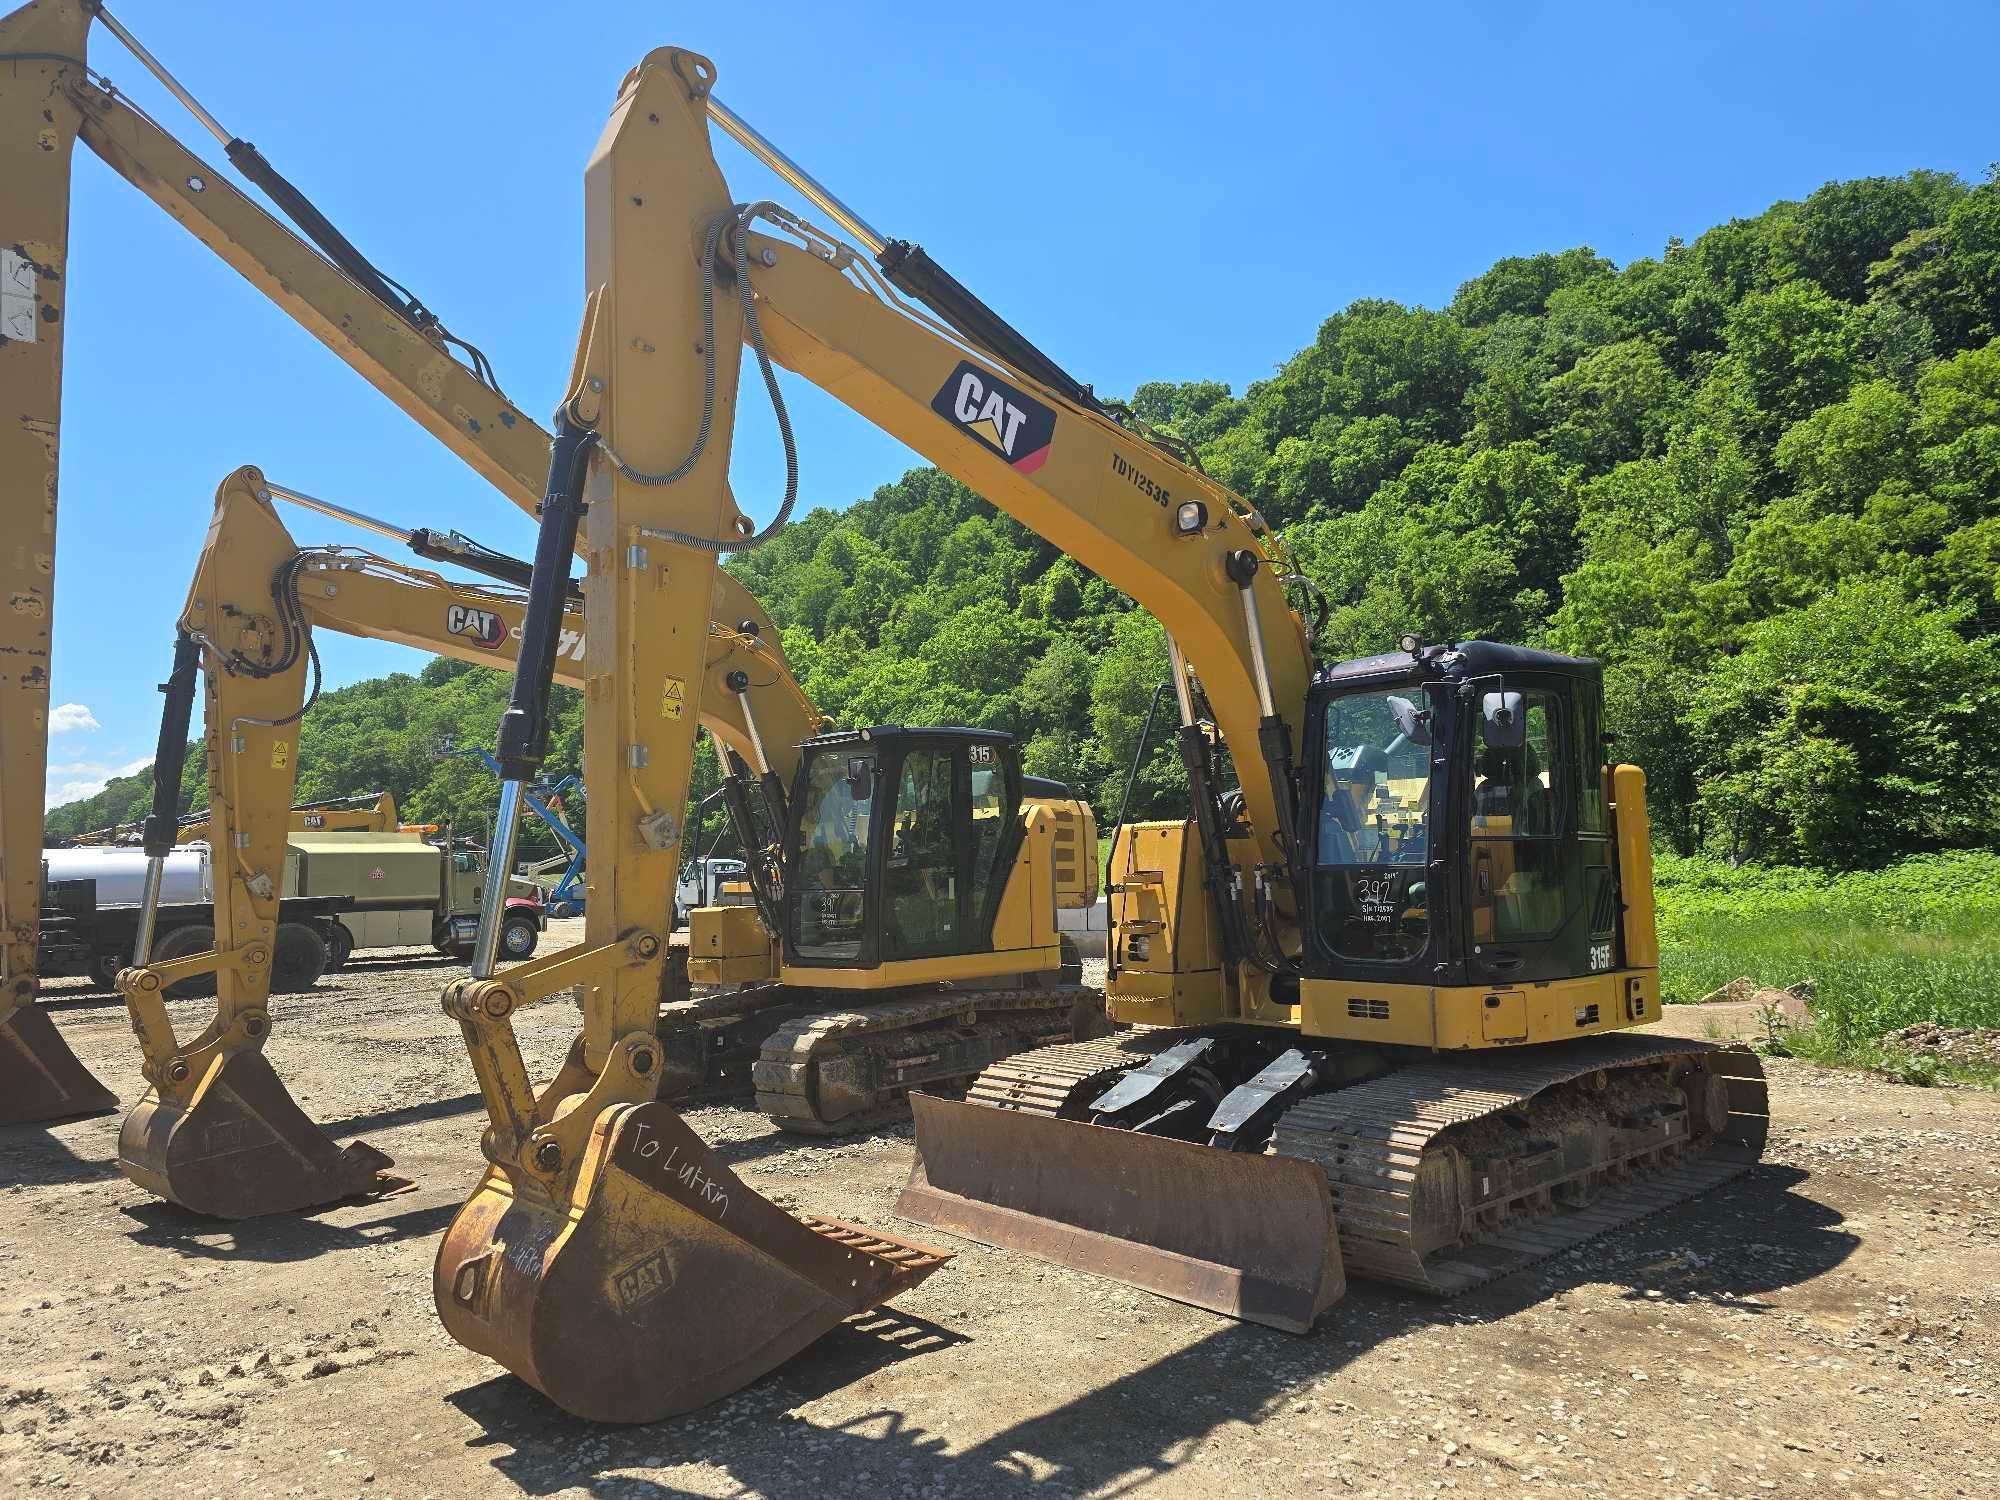 2019 CAT 315FLCR HYDRAULIC EXCAVATOR SN:TDY12535 powered by Cat diesel engine, equipped with Cab,